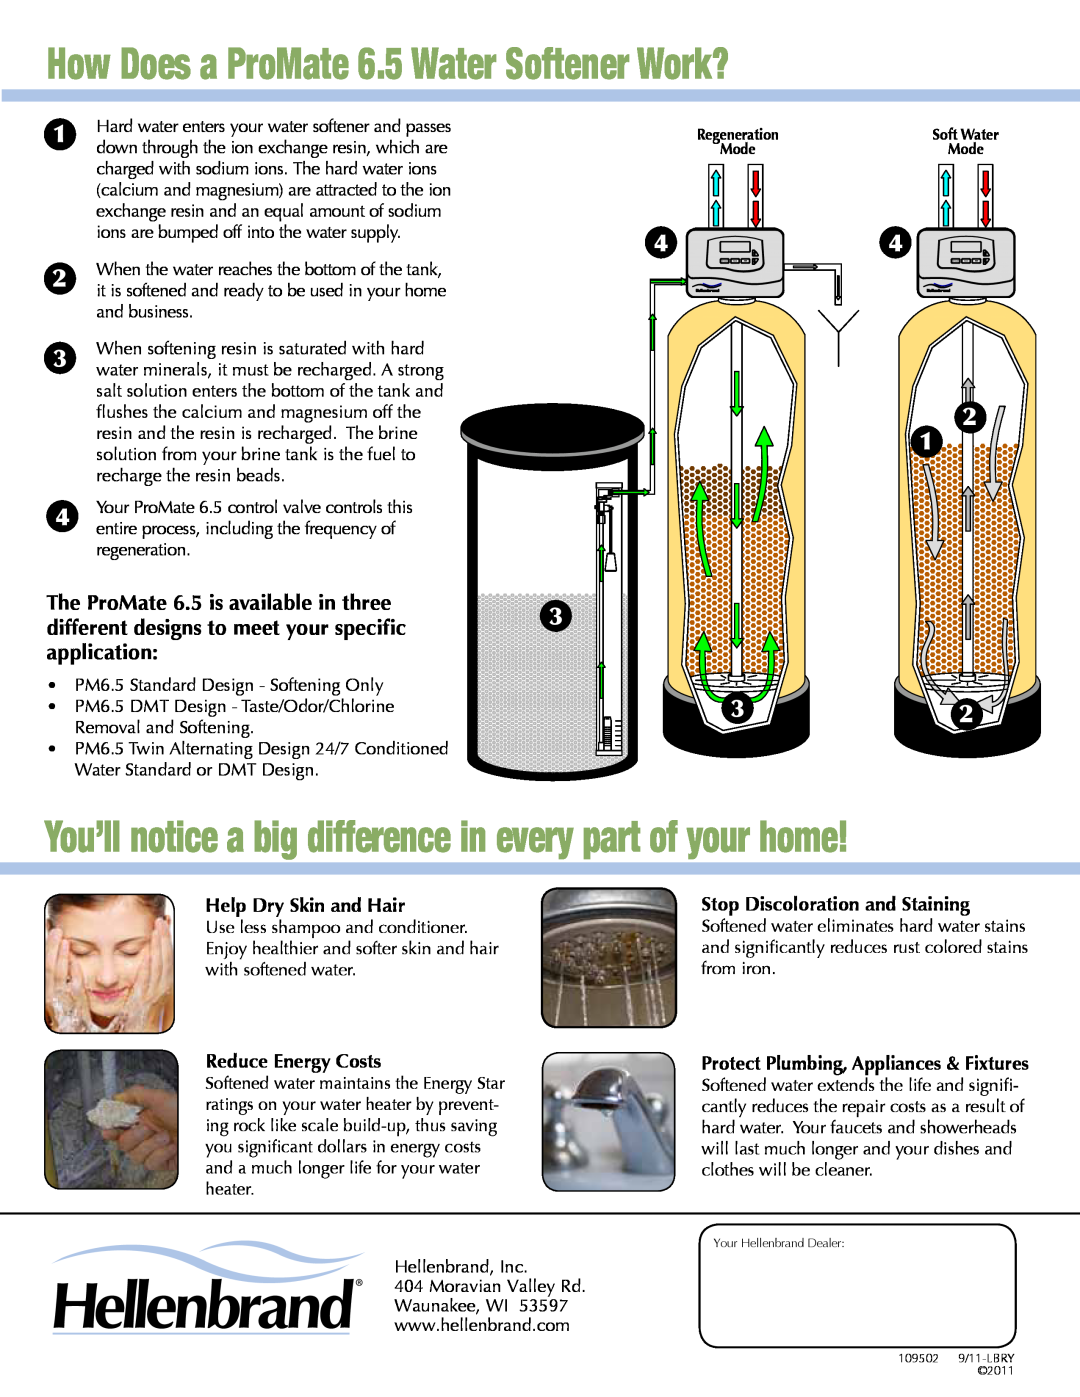 Hellenbrand How Does a ProMate 6.5 Water Softener Work?, You’ll notice a big difference in every part of your home 